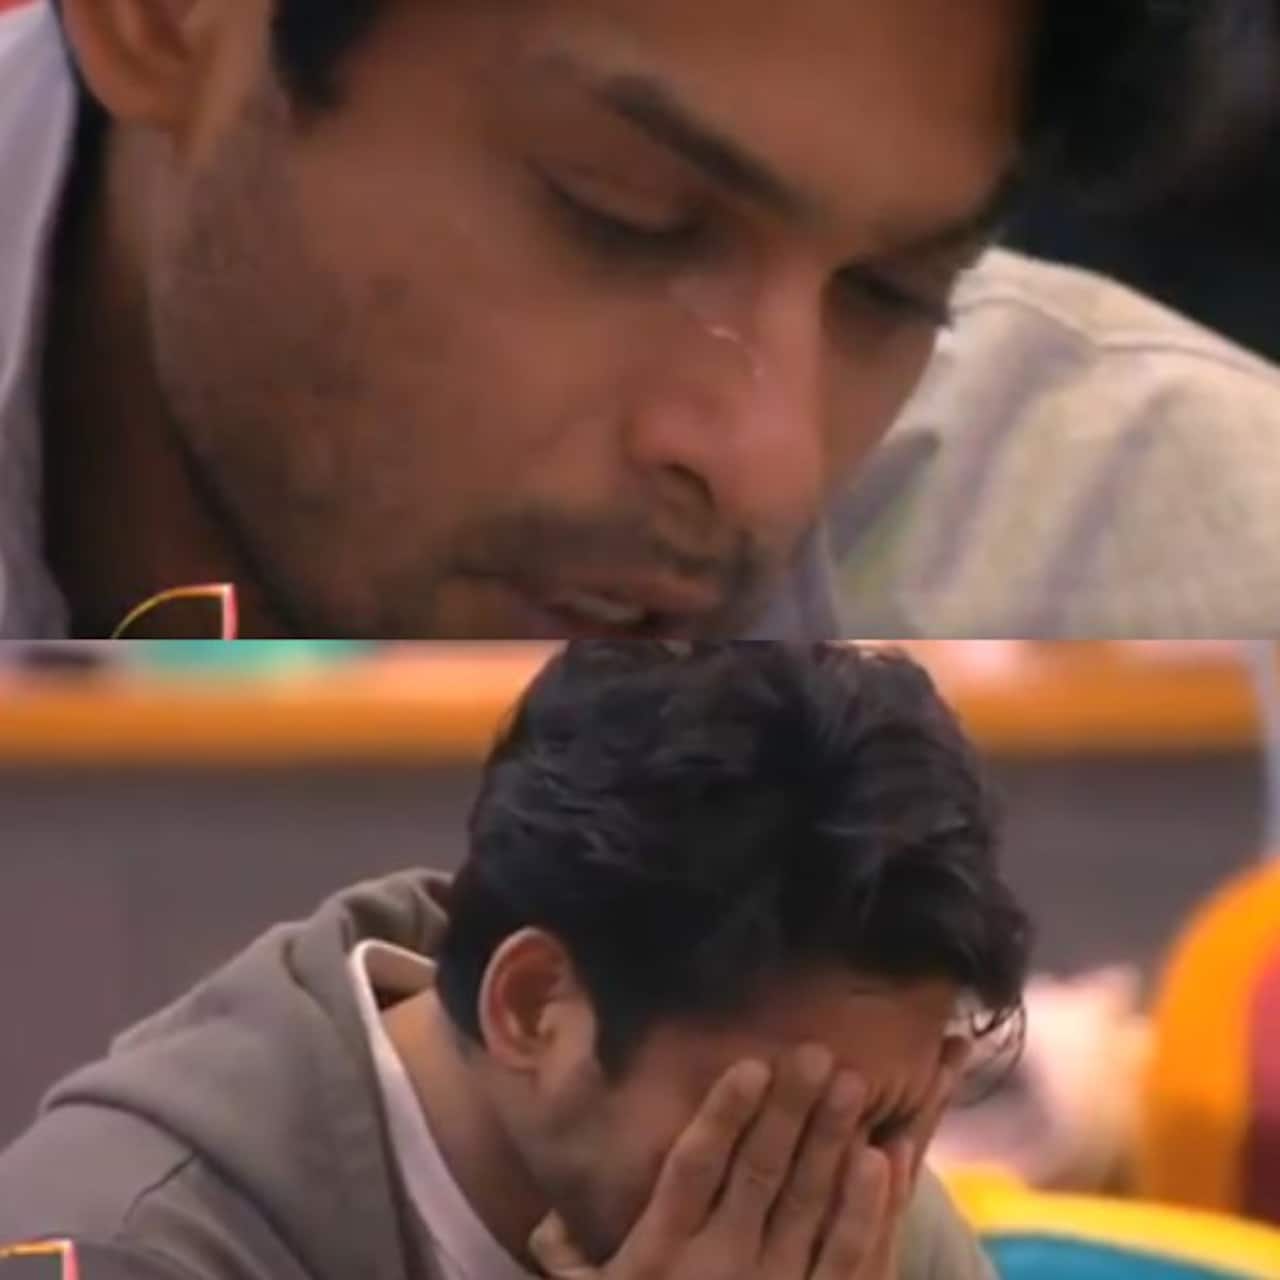 Bigg Boss 13: Sidharth Shukla gets teary-eyed while sorting out his differences with Asim Riaz